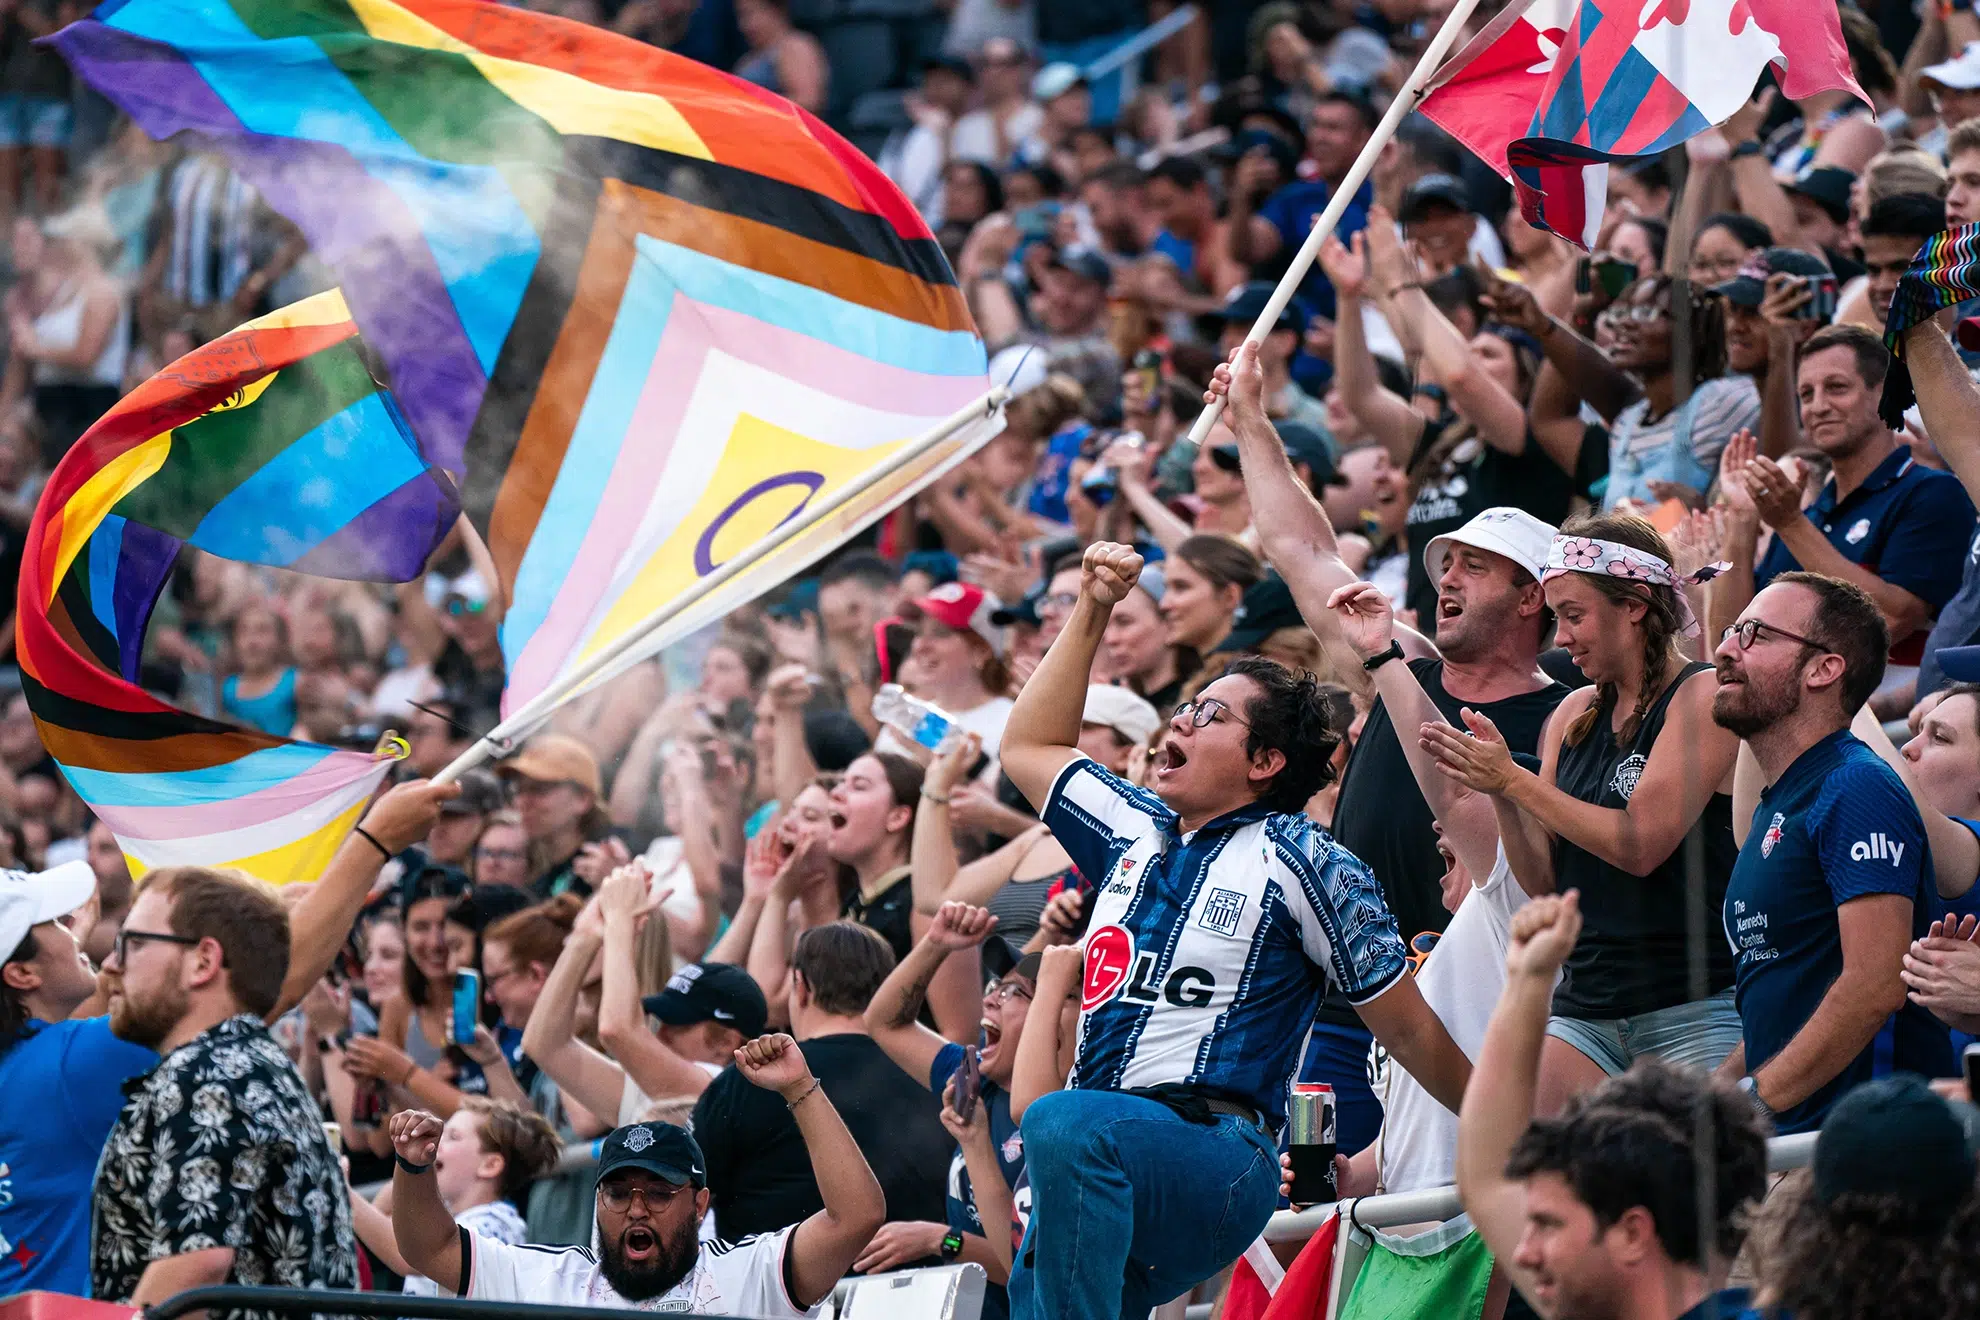 Fans yell and pump their fist in the air as an LGBTQ+ flag is waved.